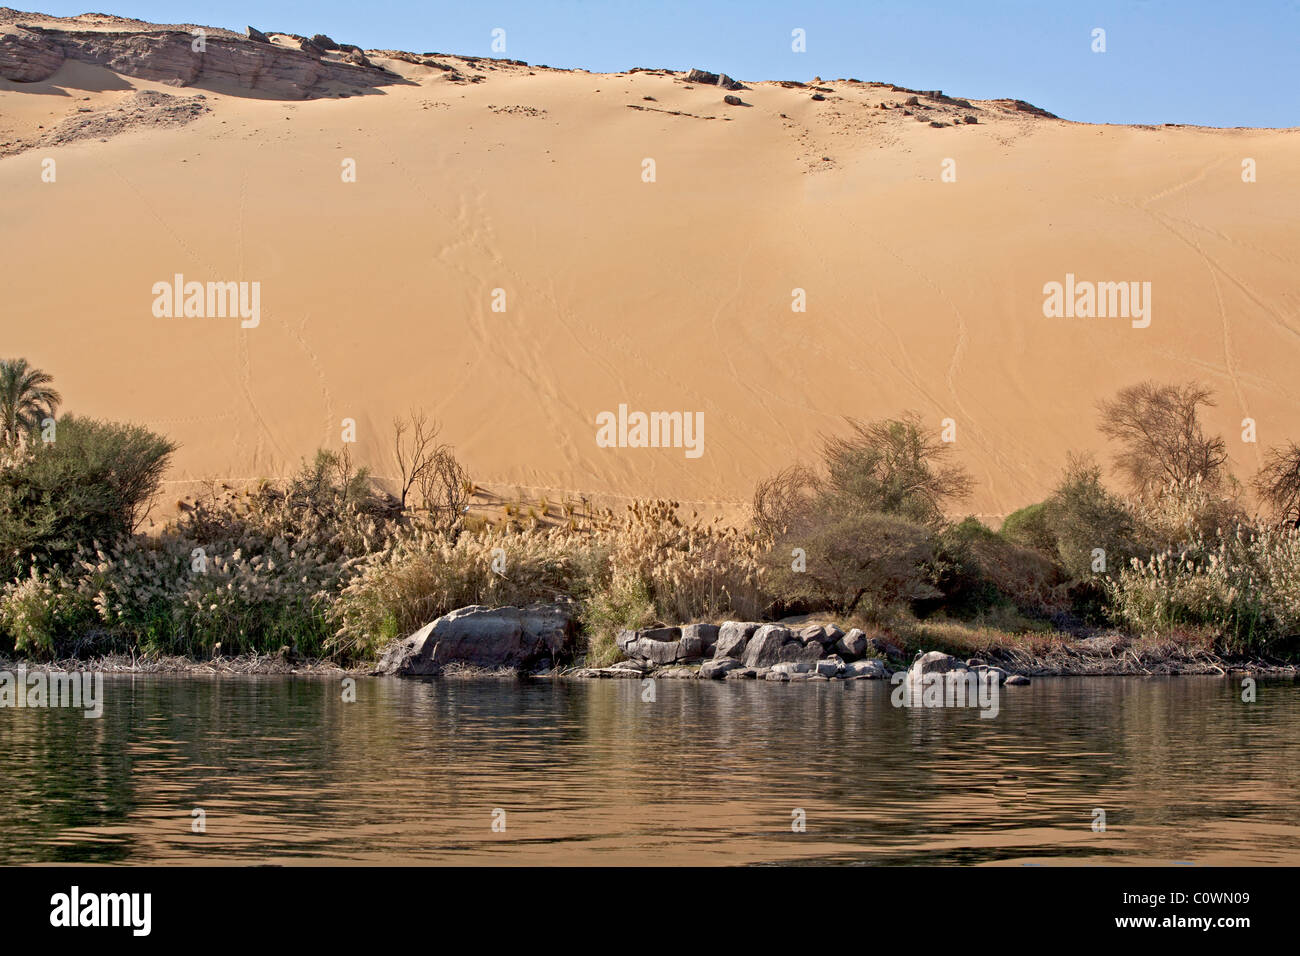 Desert sands sweep up to the edge of the Egypt's Nile River near Aswan. Stock Photo